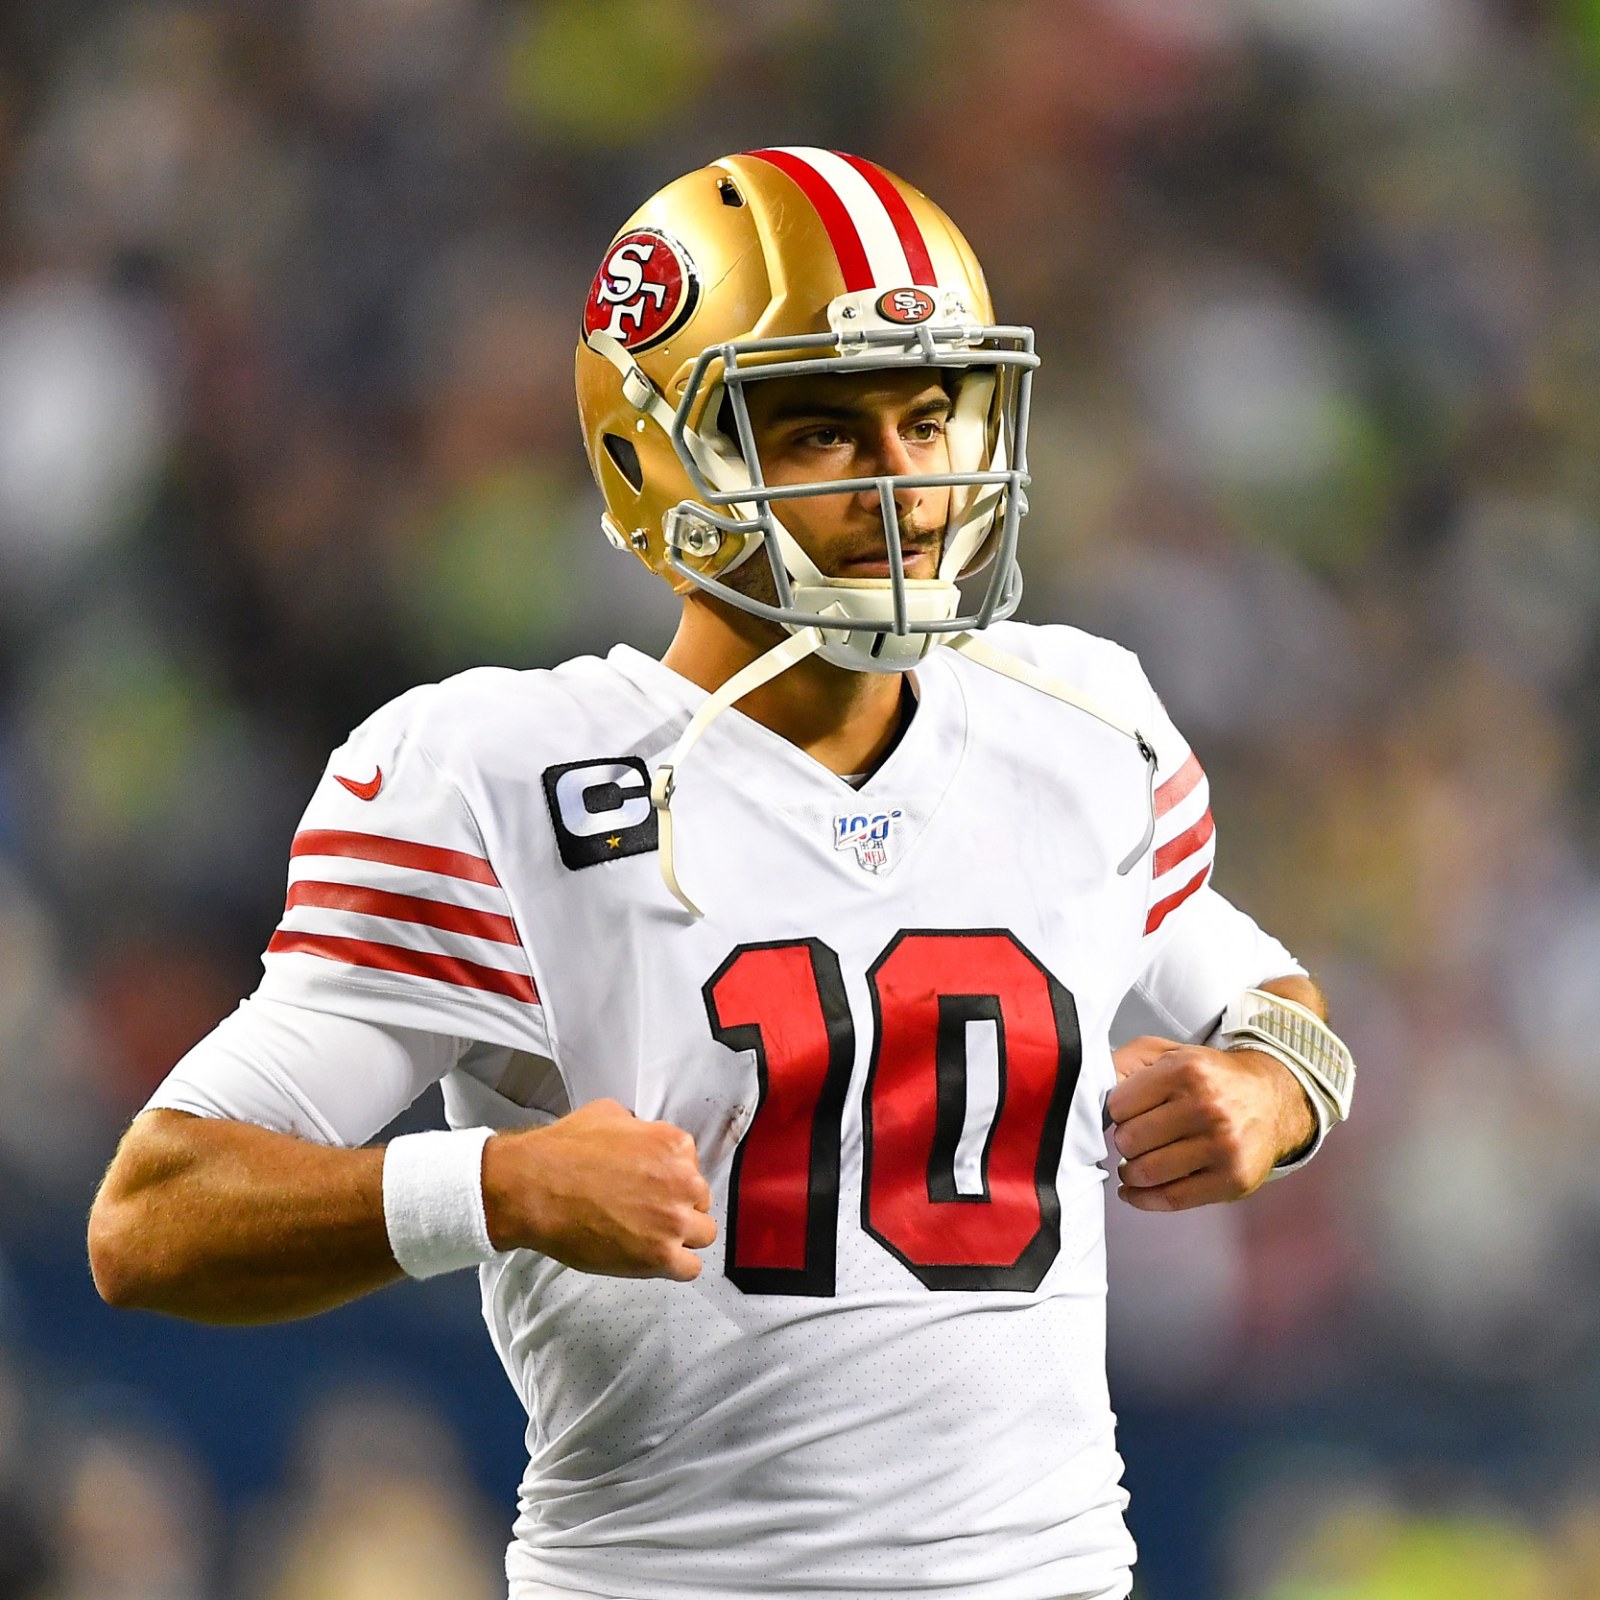 Super Bowl 2020: Will NFL Allow 49ers to Wear Throwback Uniforms?